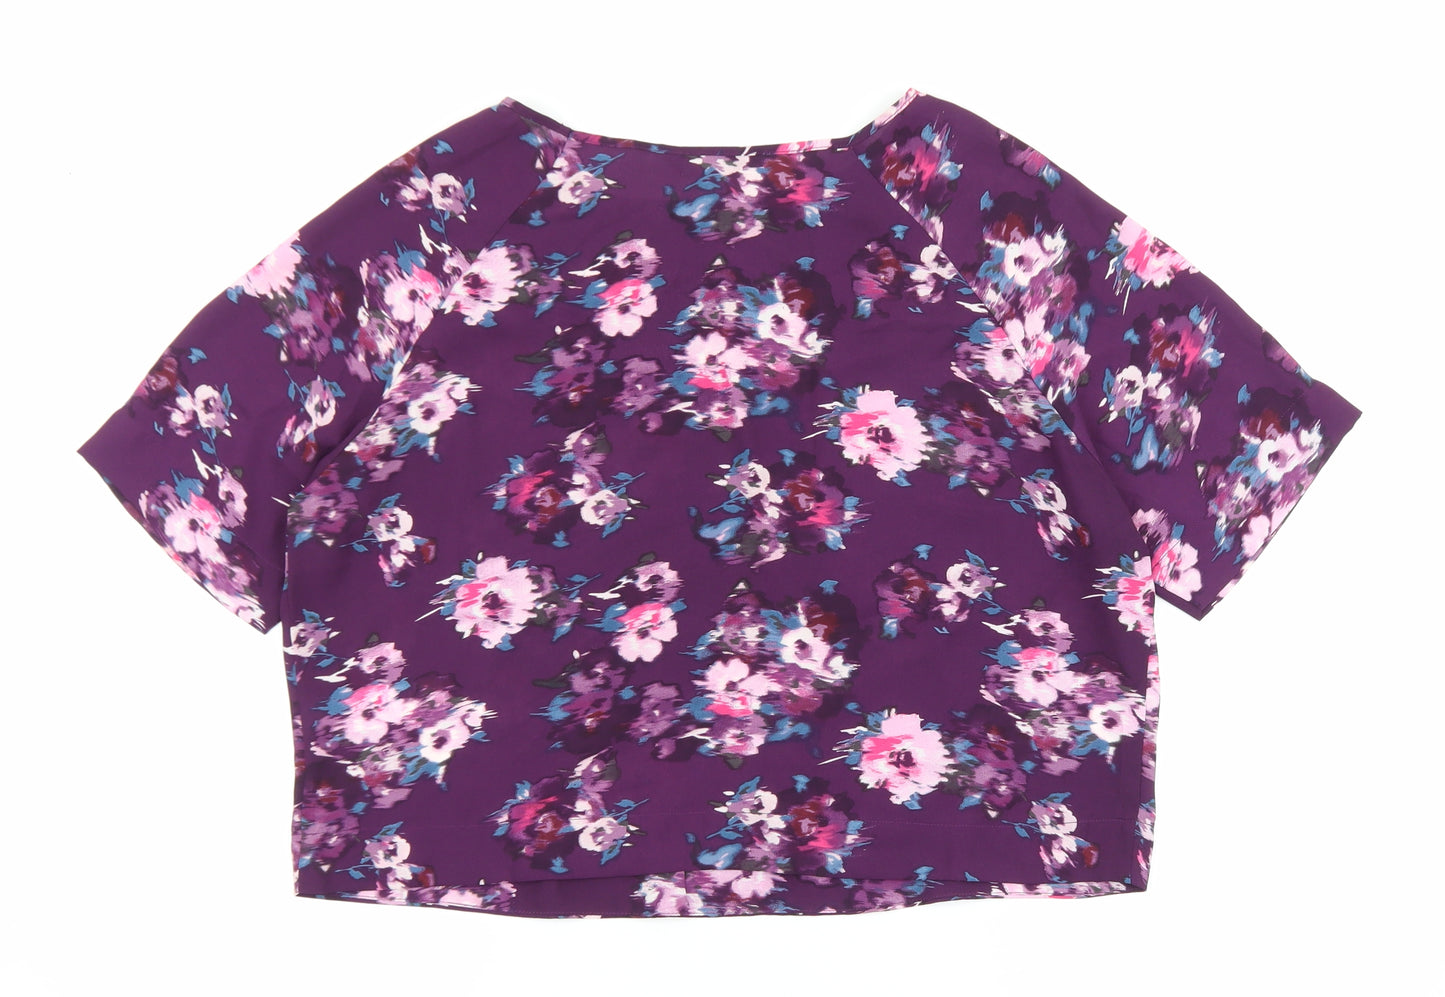 New Look Womens Purple Floral Polyester Basic Blouse Size 10 Round Neck